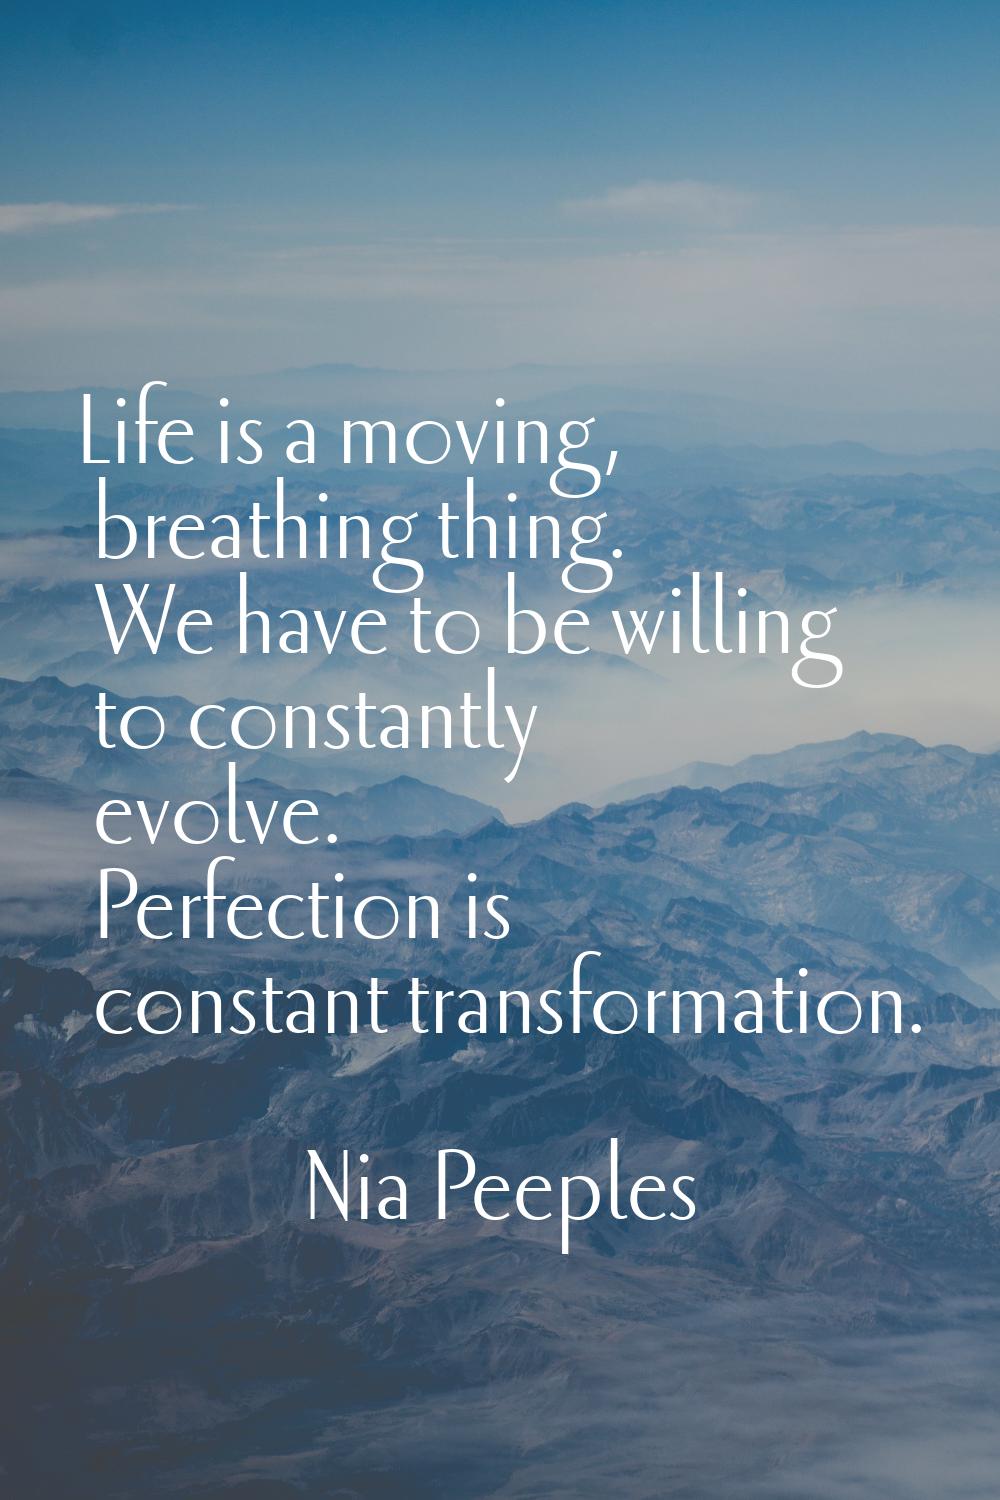 Life is a moving, breathing thing. We have to be willing to constantly evolve. Perfection is consta